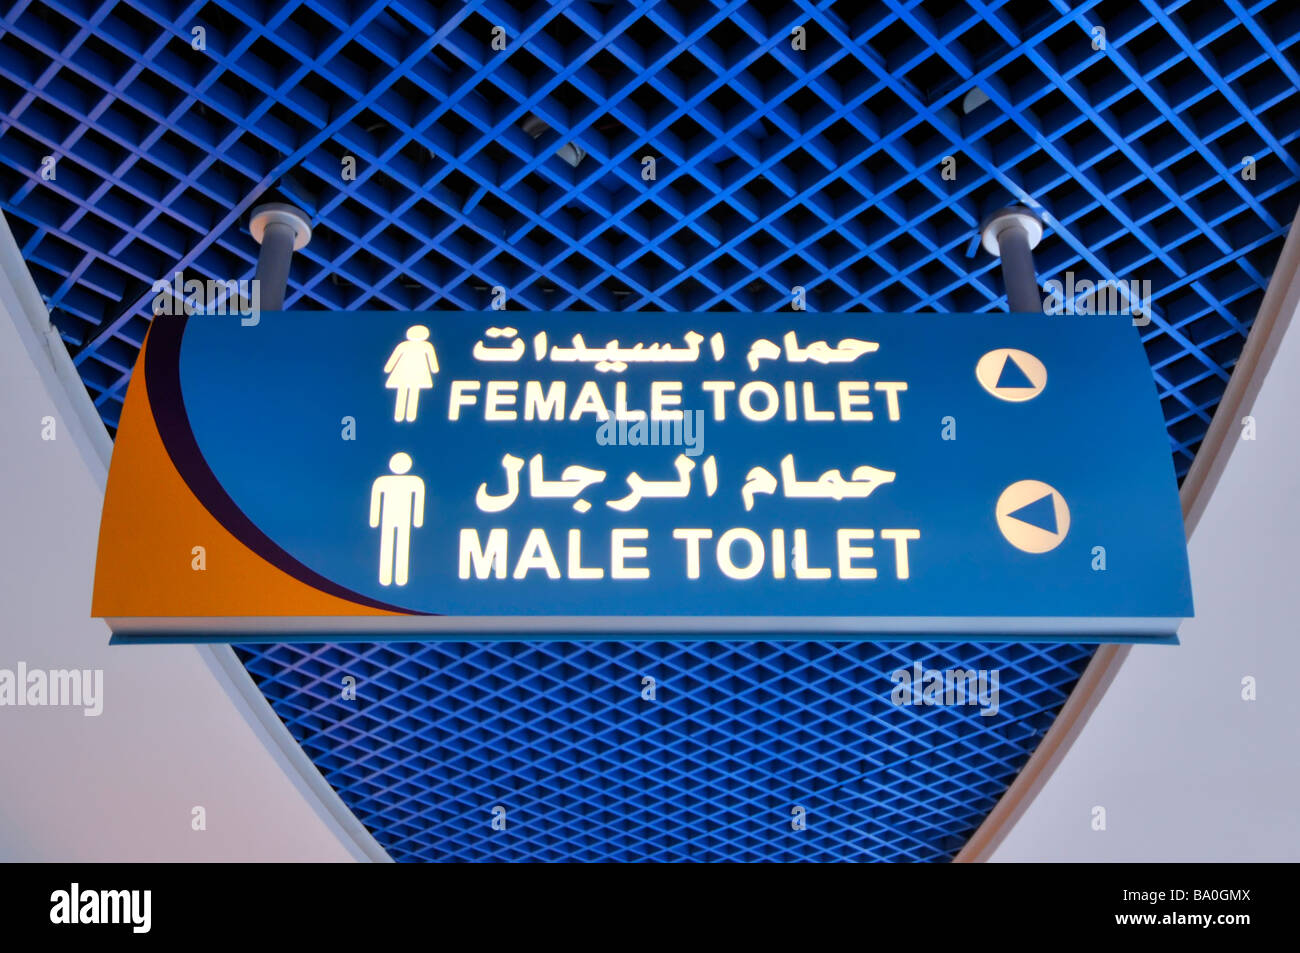 Abu Dhabi Marina shopping mall overhead bilingual sign for female and male toilets with icons Stock Photo